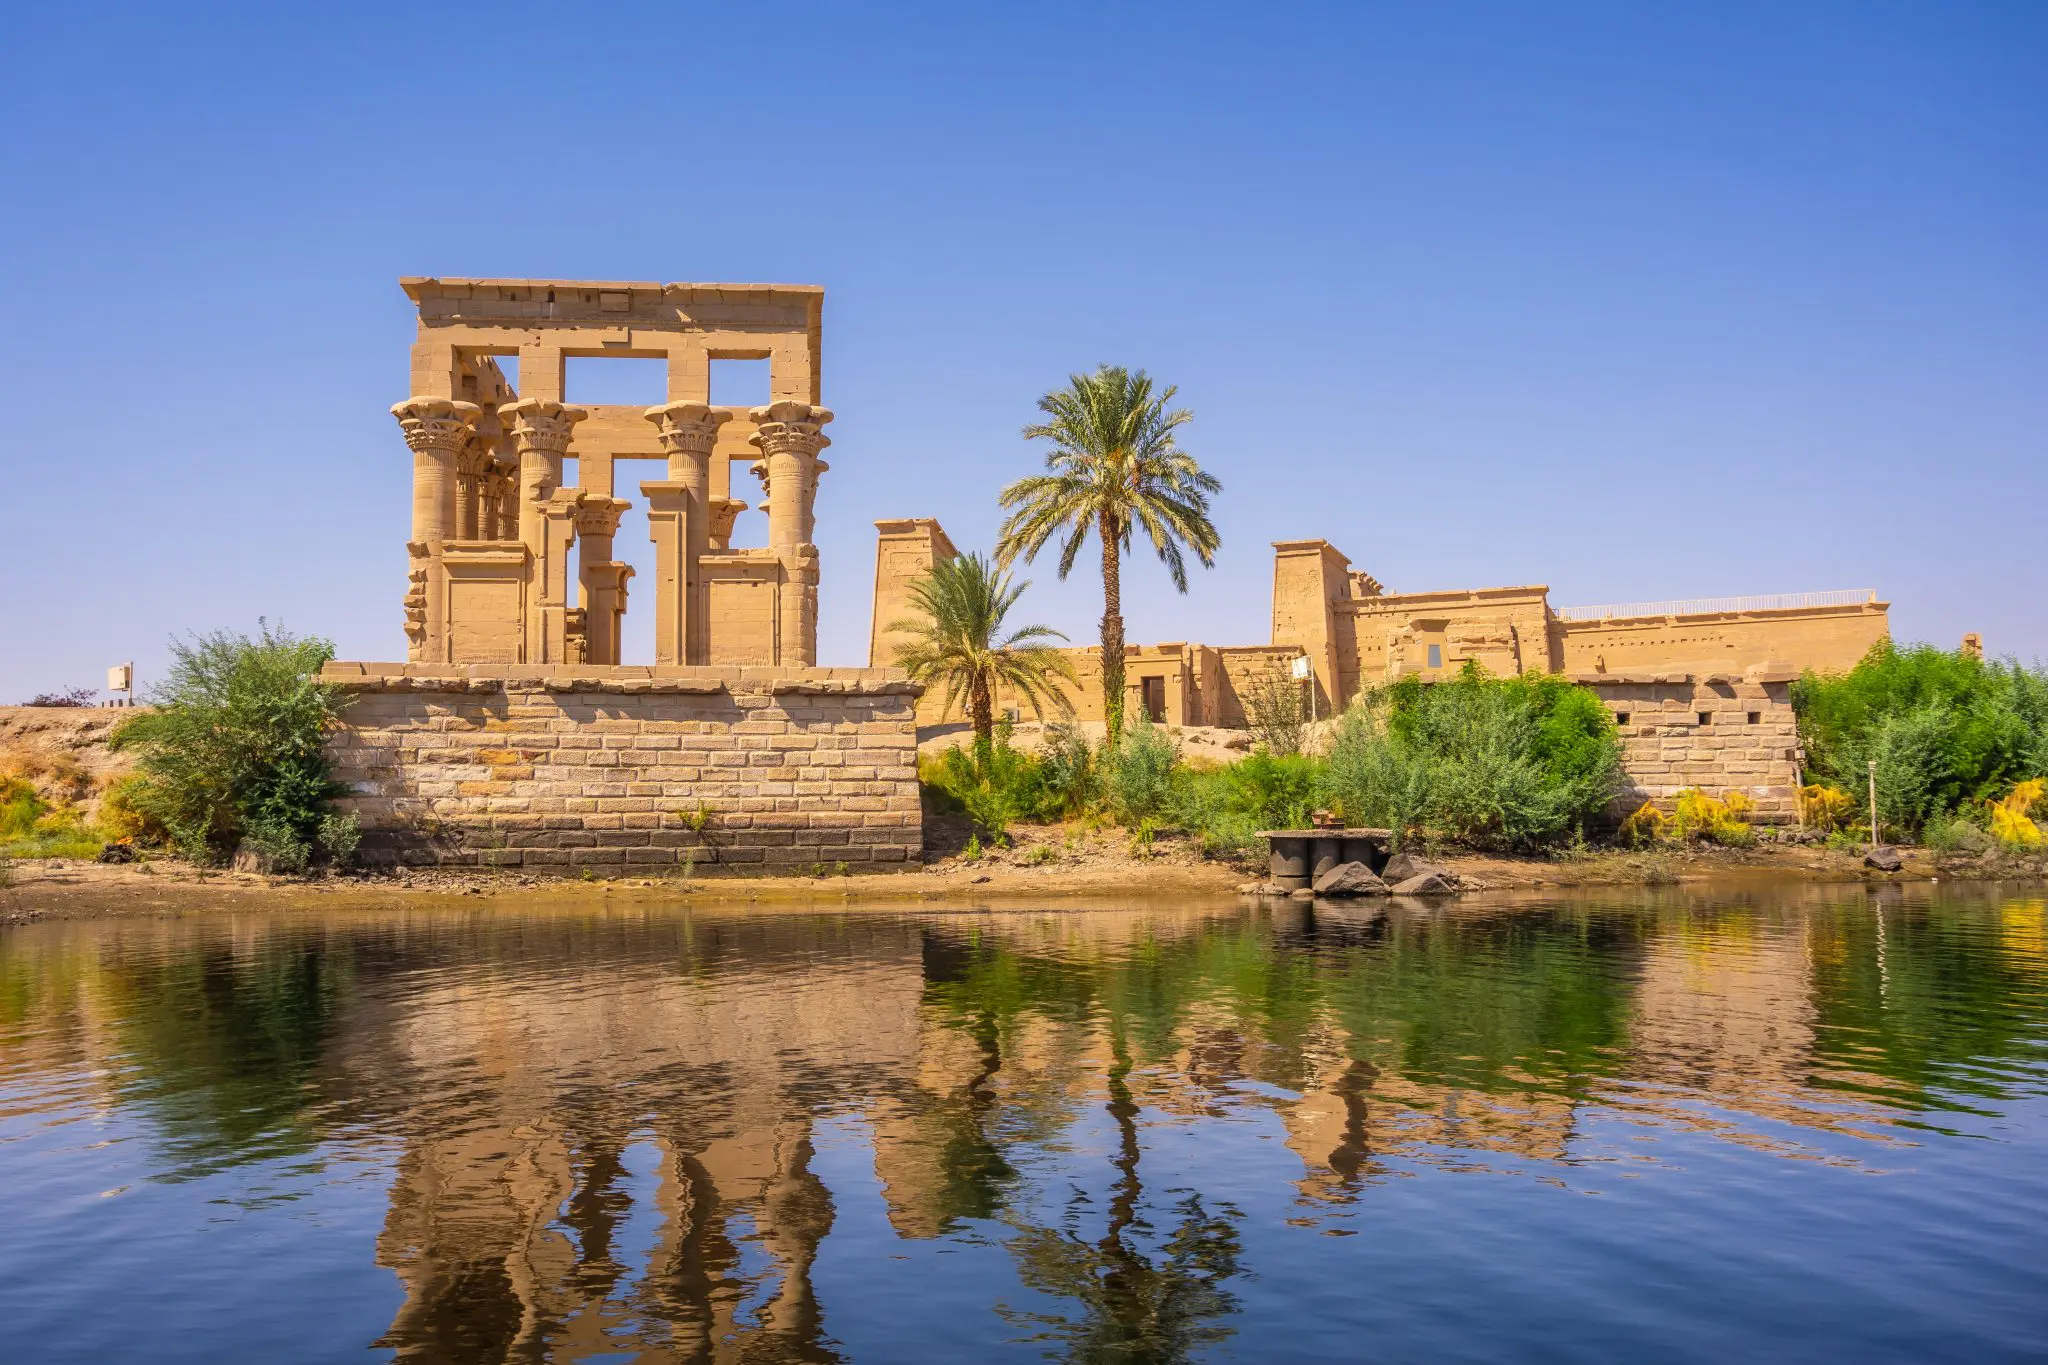 Top 10 Attractions in Egypt That Aren’t the Pyramids